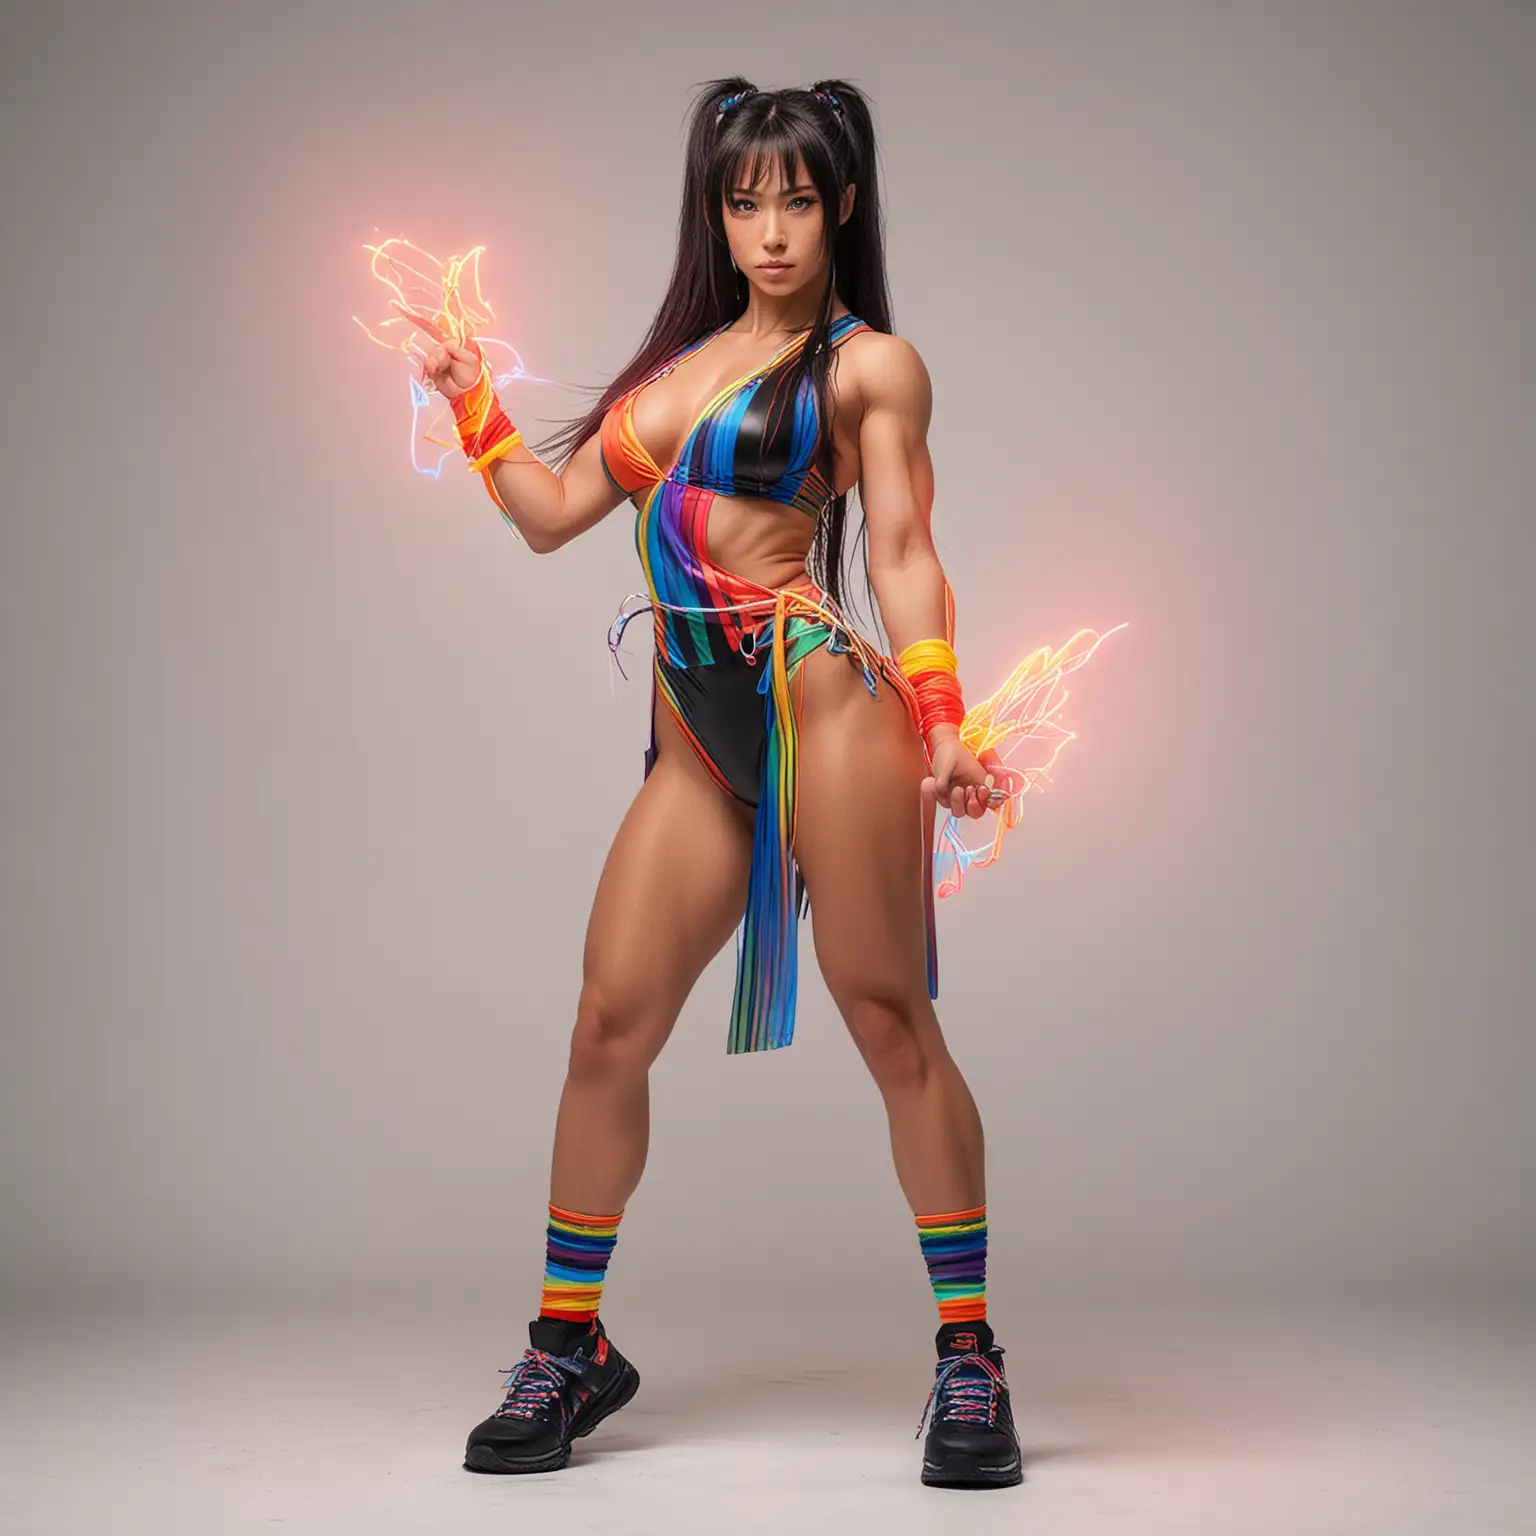  Photo of a female Japanese bodybuilder is depicted in full height, wearing black sneakers with glowing neon laces. She has long dark hair and blue eyes, dressed in a sleeveless robe with glowing rainbow-neon stripes along its edges. Chun-Li Cosplay photograph, featuring vibrant glowing colors and detailed textures. Her pose reflects confidence as she stands upright against a white background